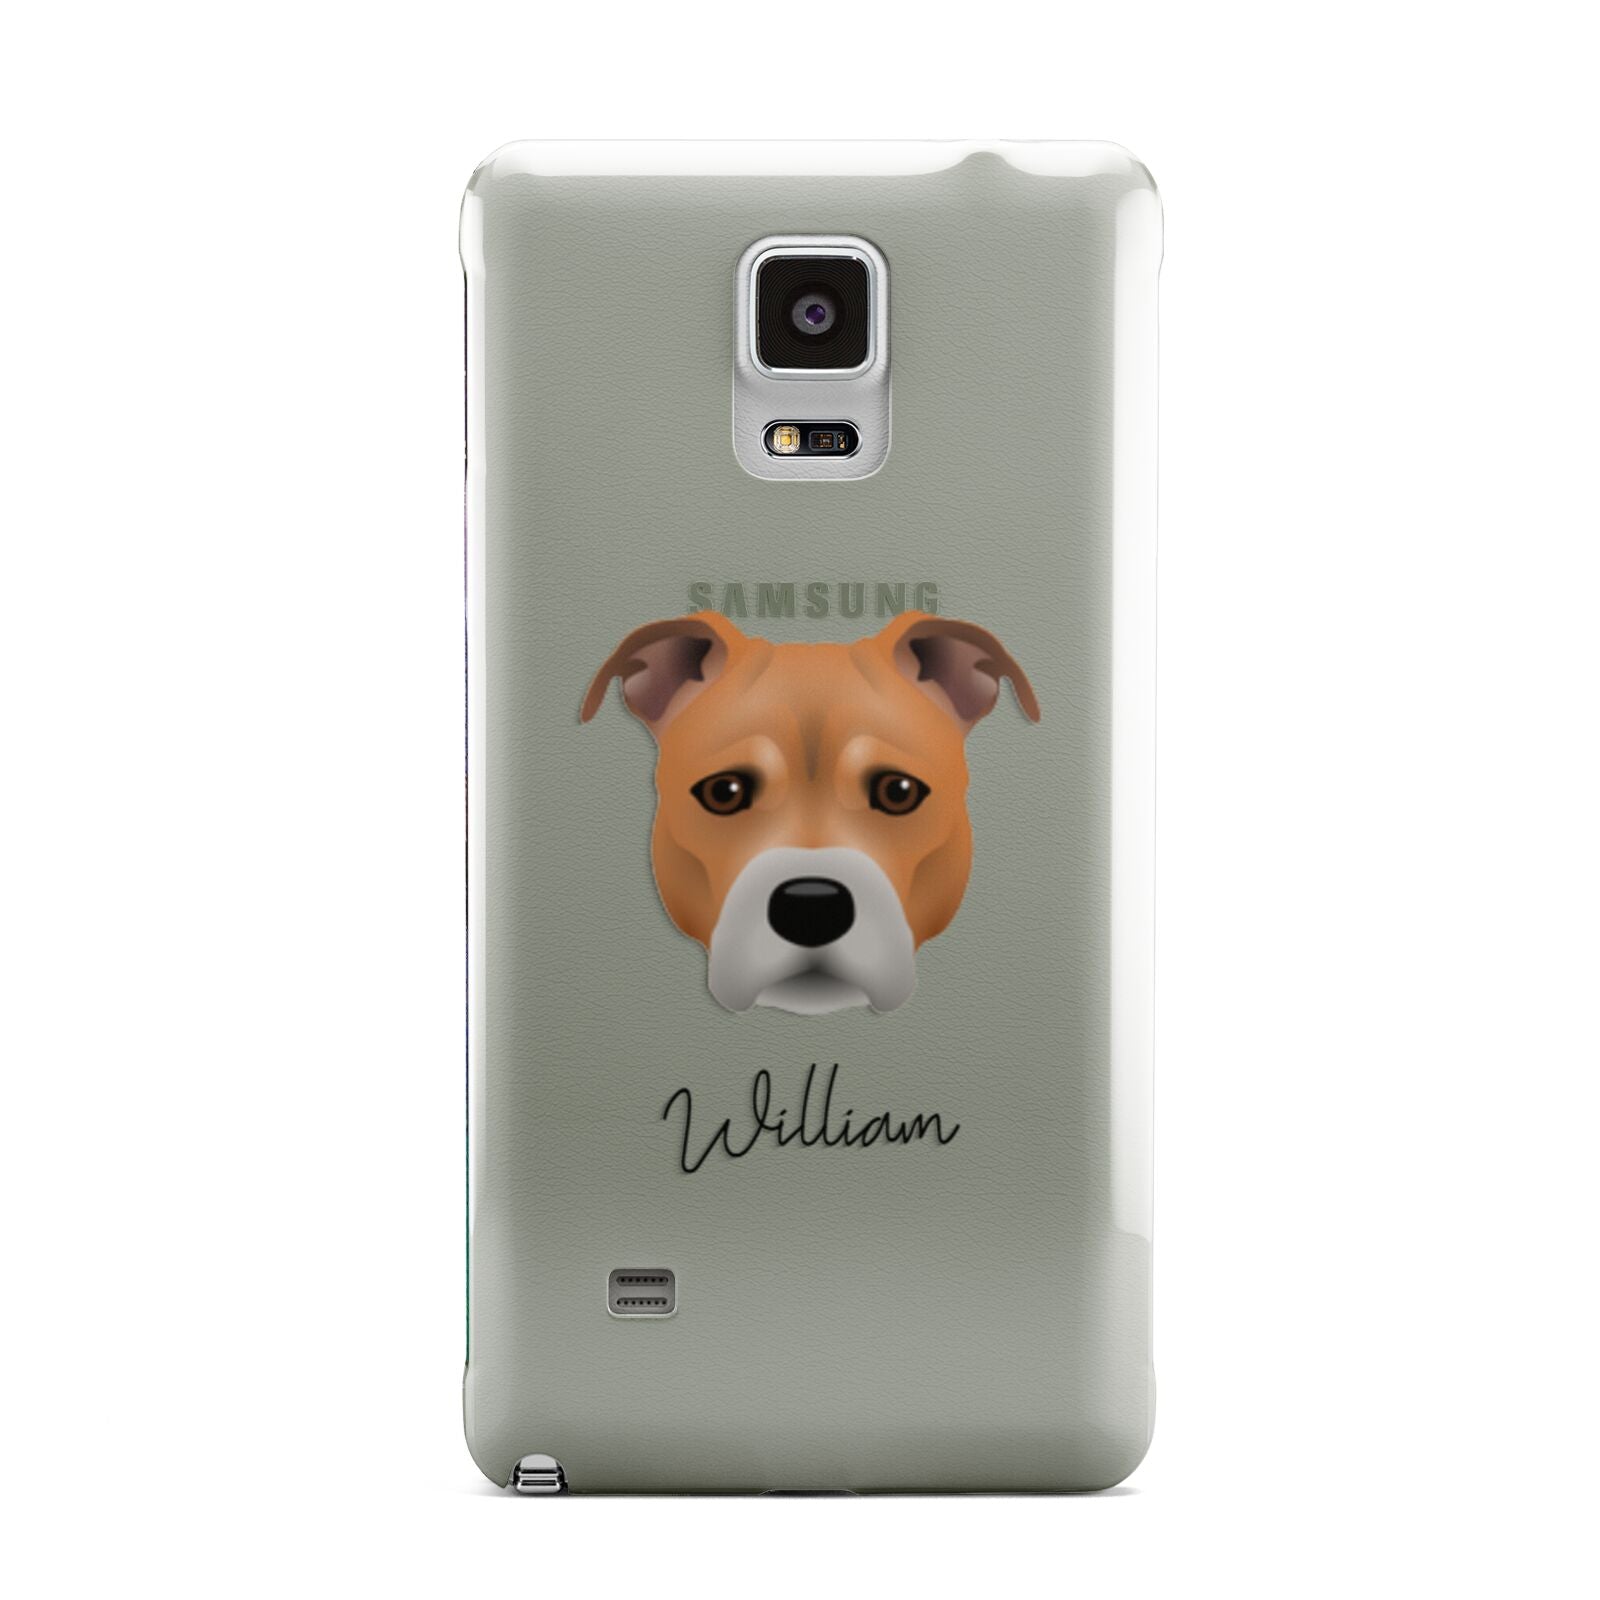 Staffordshire Bull Terrier Personalised Samsung Galaxy Note 4 Case